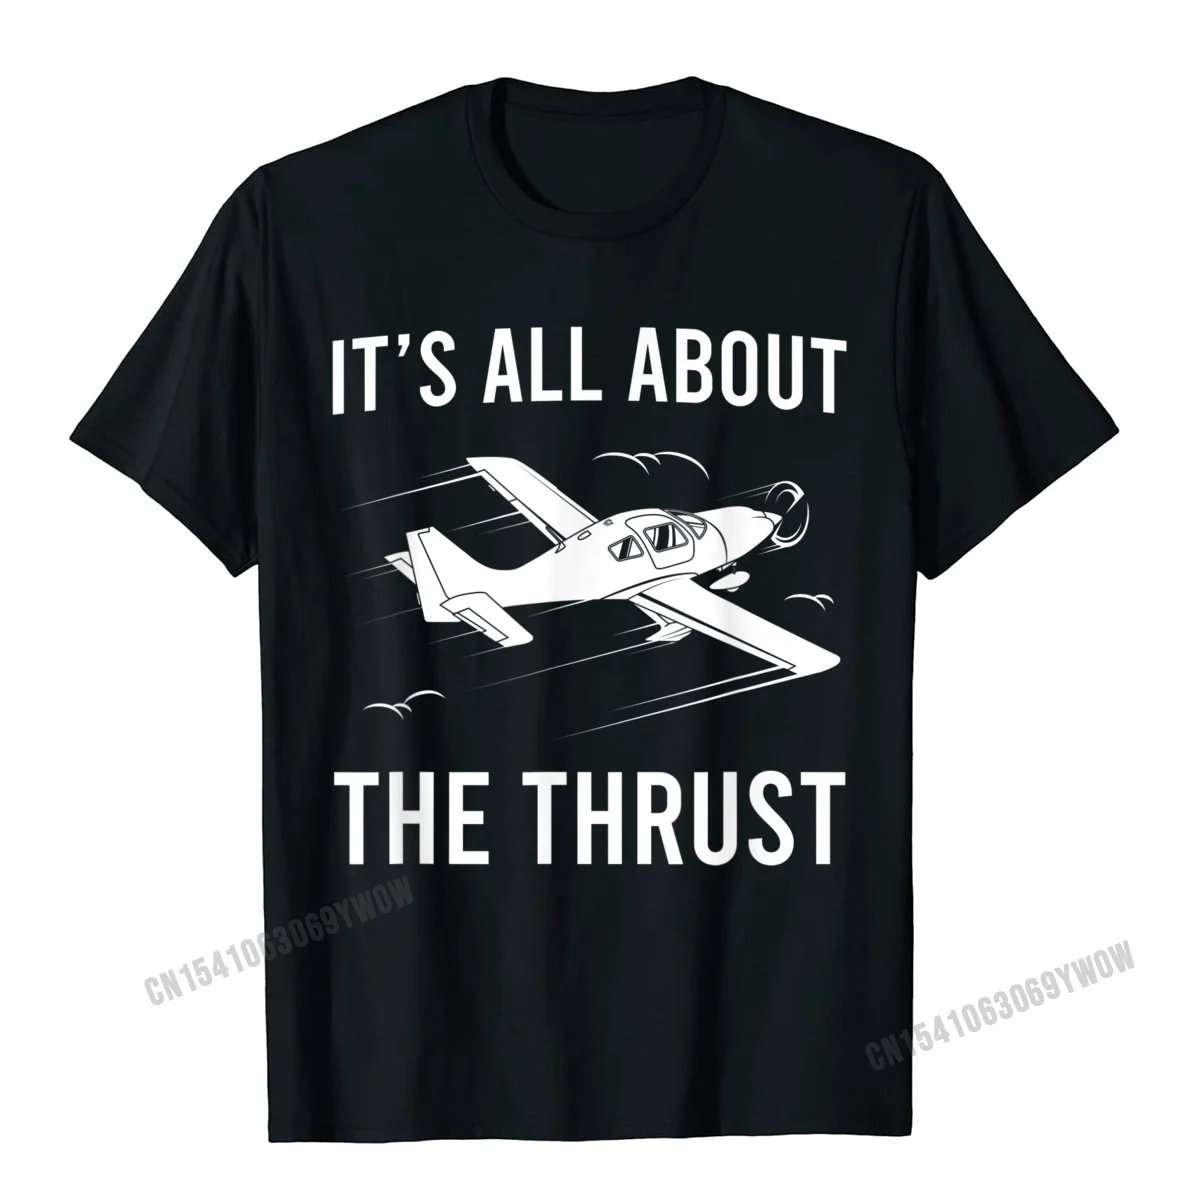 100% Cotton Fabric Men Short Sleeve Normal T-Shirt Gift T Shirt Slim Fit Print Round Neck T-Shirt Drop Shipping Funny Pilot Its All About The Thrust Airplane Pilot Gift T-Shirt__35 black